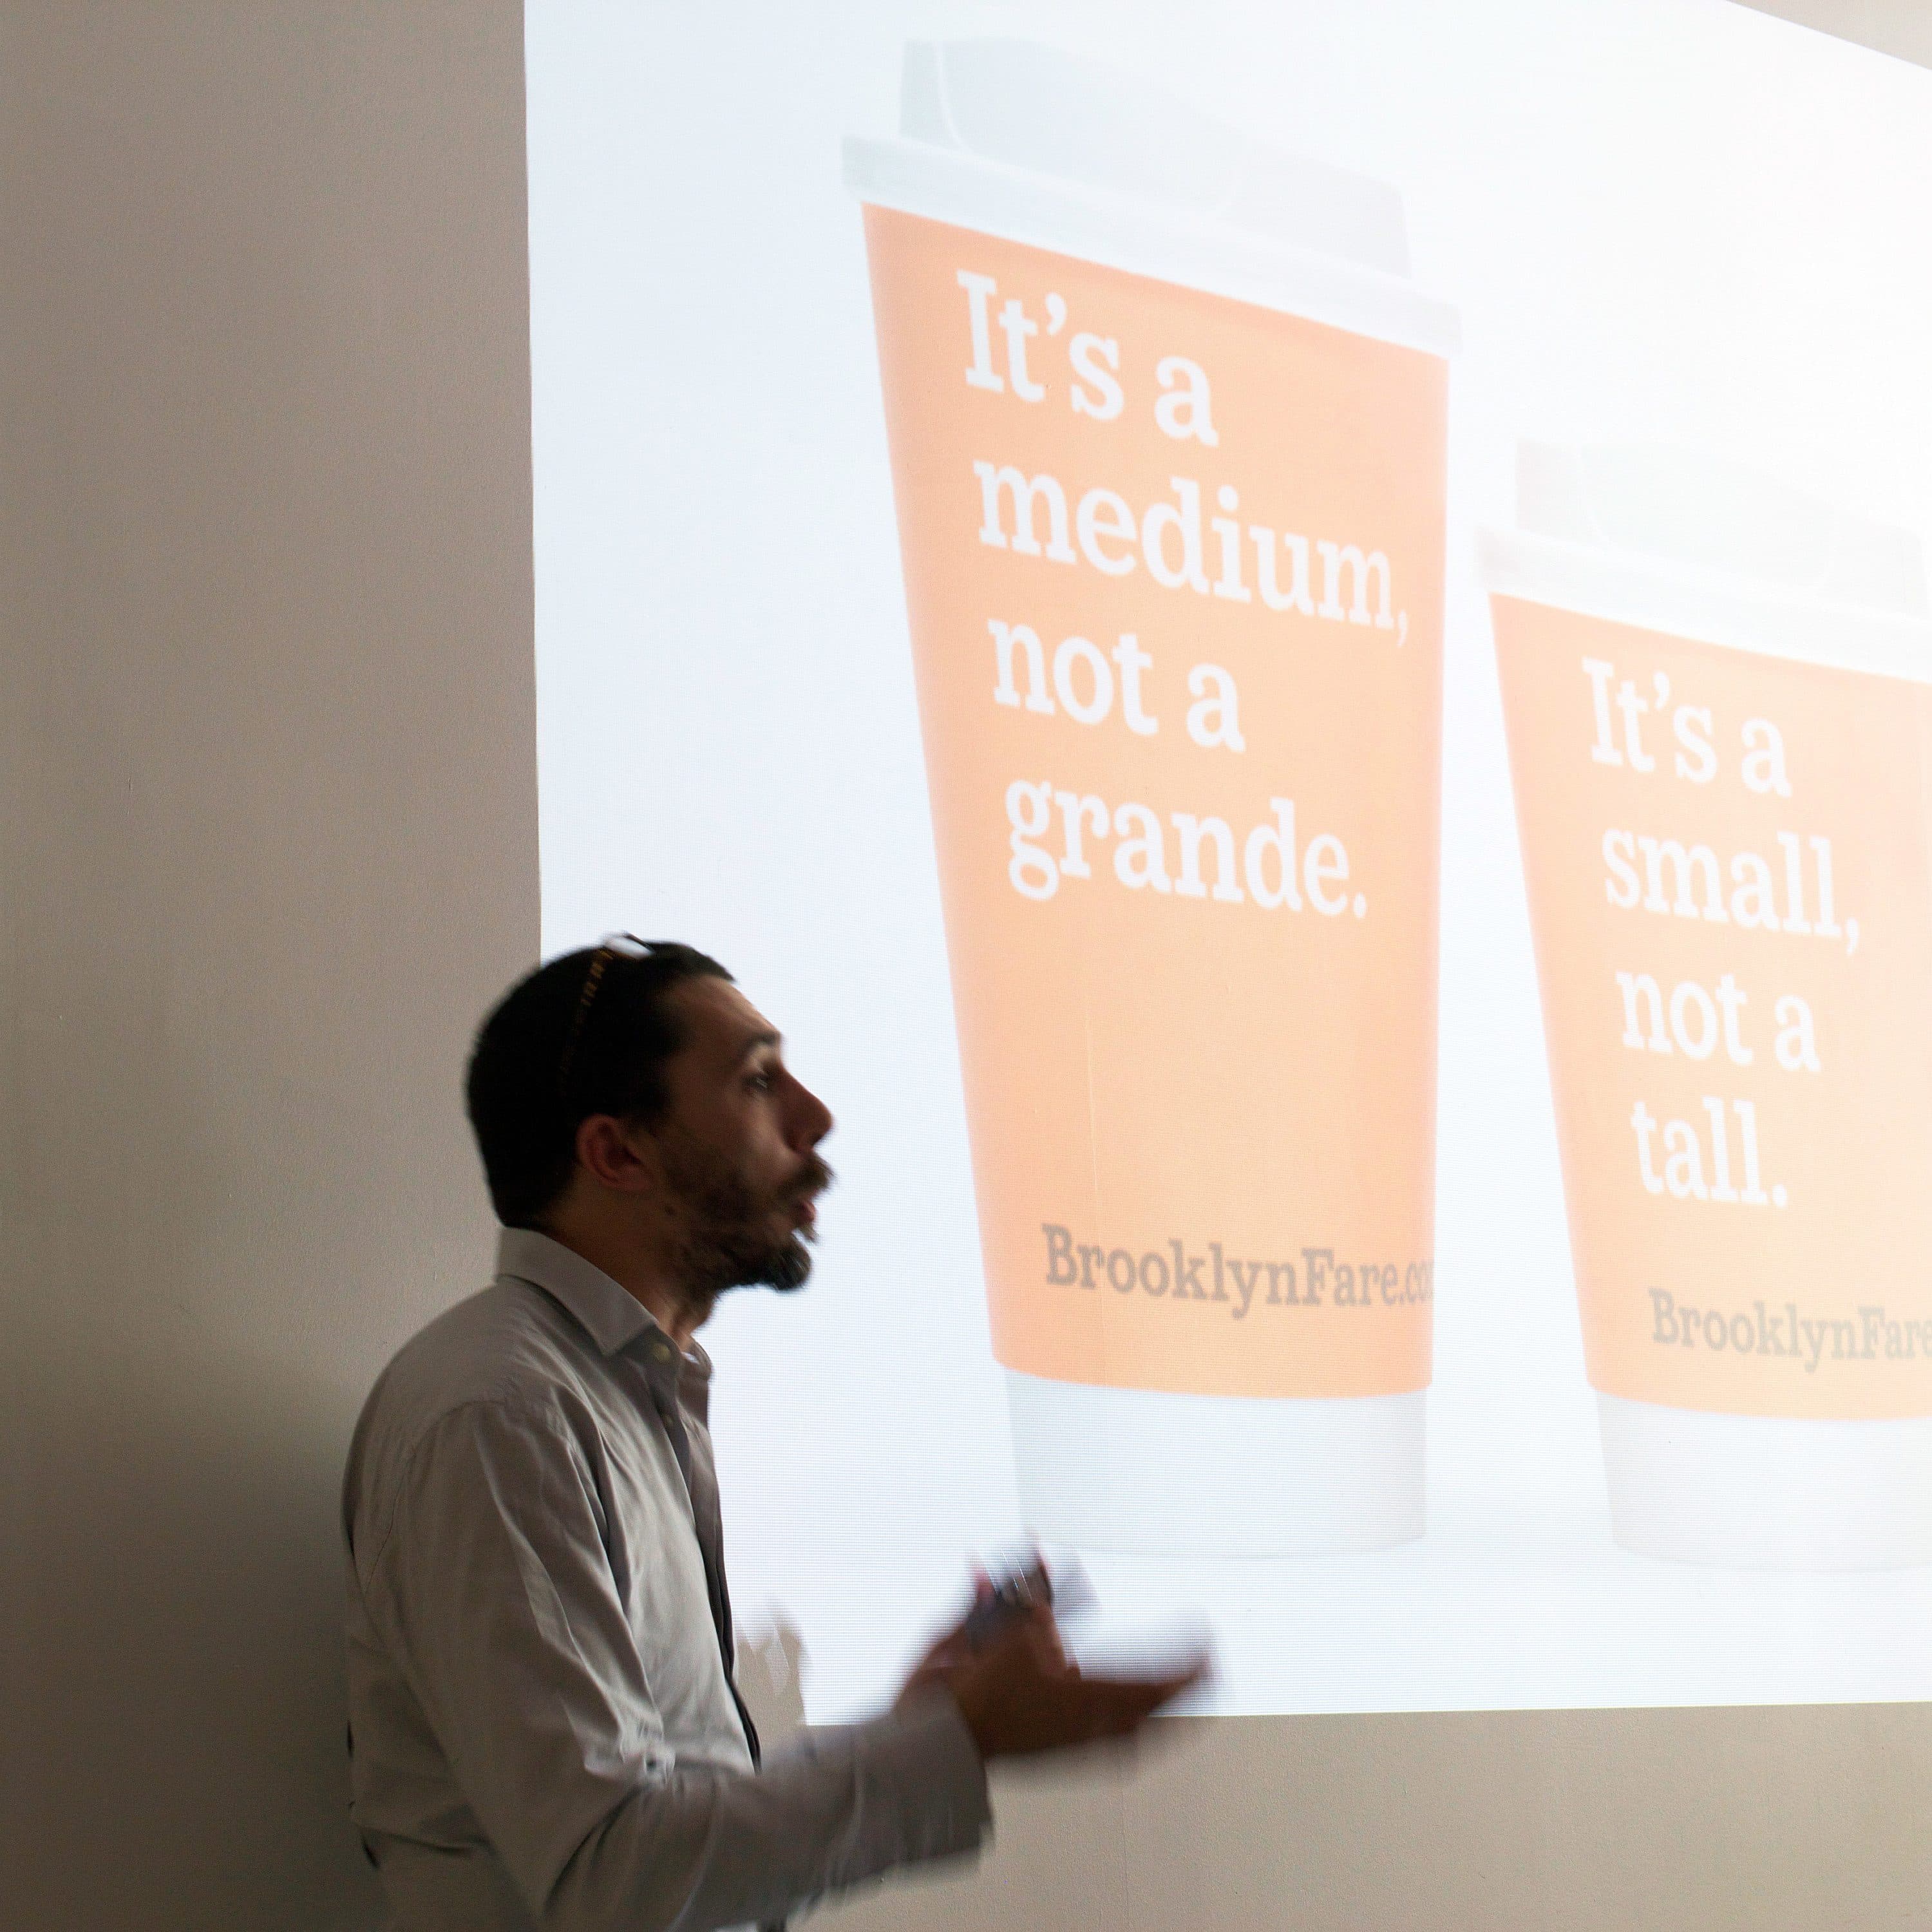 A man gestures in front of a projected image showing two coffee cups. The cup on the left reads "It's a medium, not a grande." and the cup on the right reads "It's a small, not a tall." Both cups display the words "BrooklynFare" at the bottom.